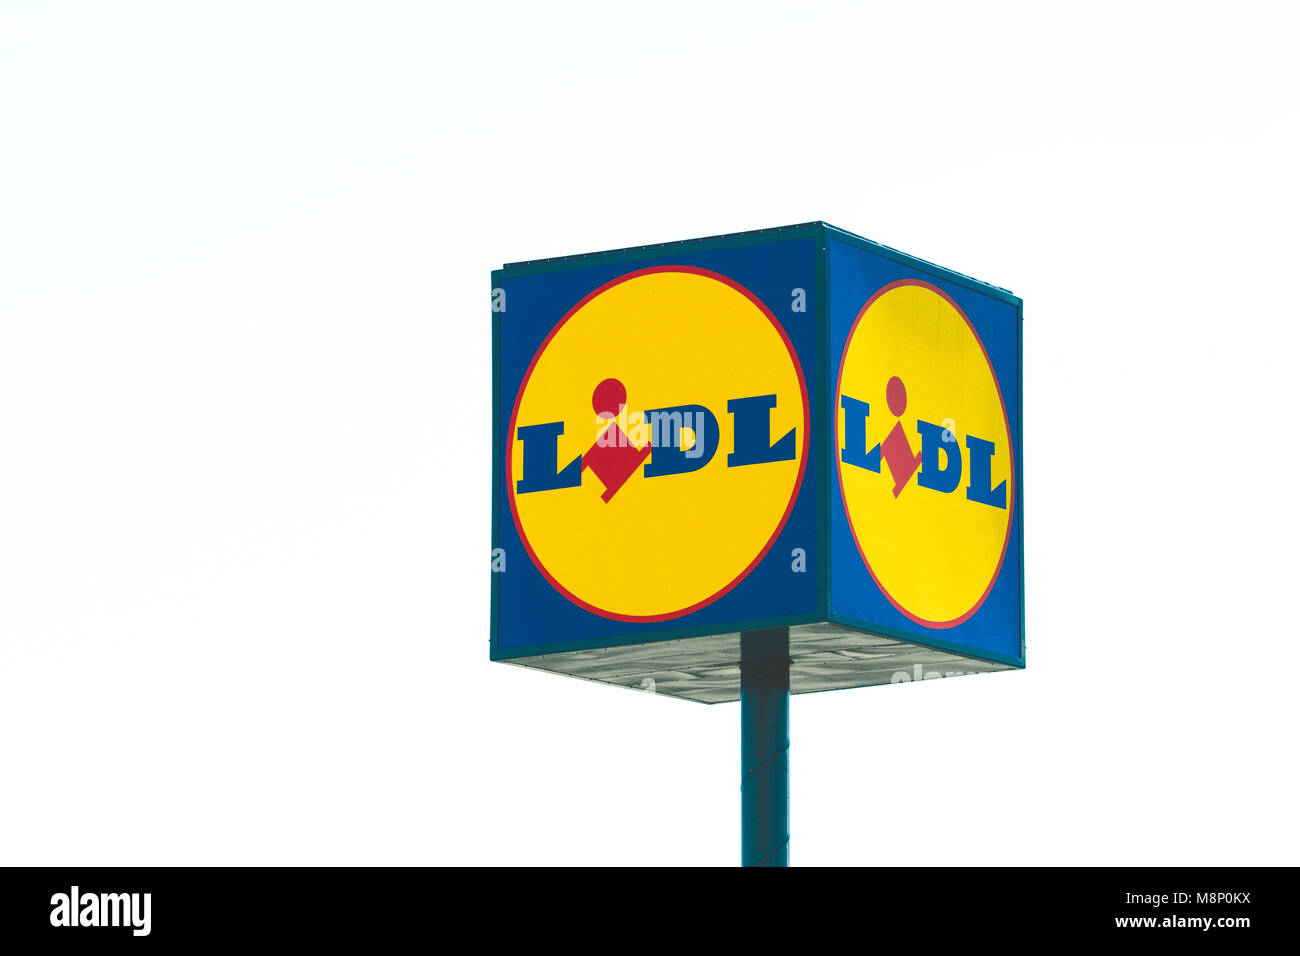 Premisse Productiecentrum Blind Sign of Lidl supermarket. Lidl is a German supermarket chain with over  10,000 stores across Europe Stock Photo - Alamy